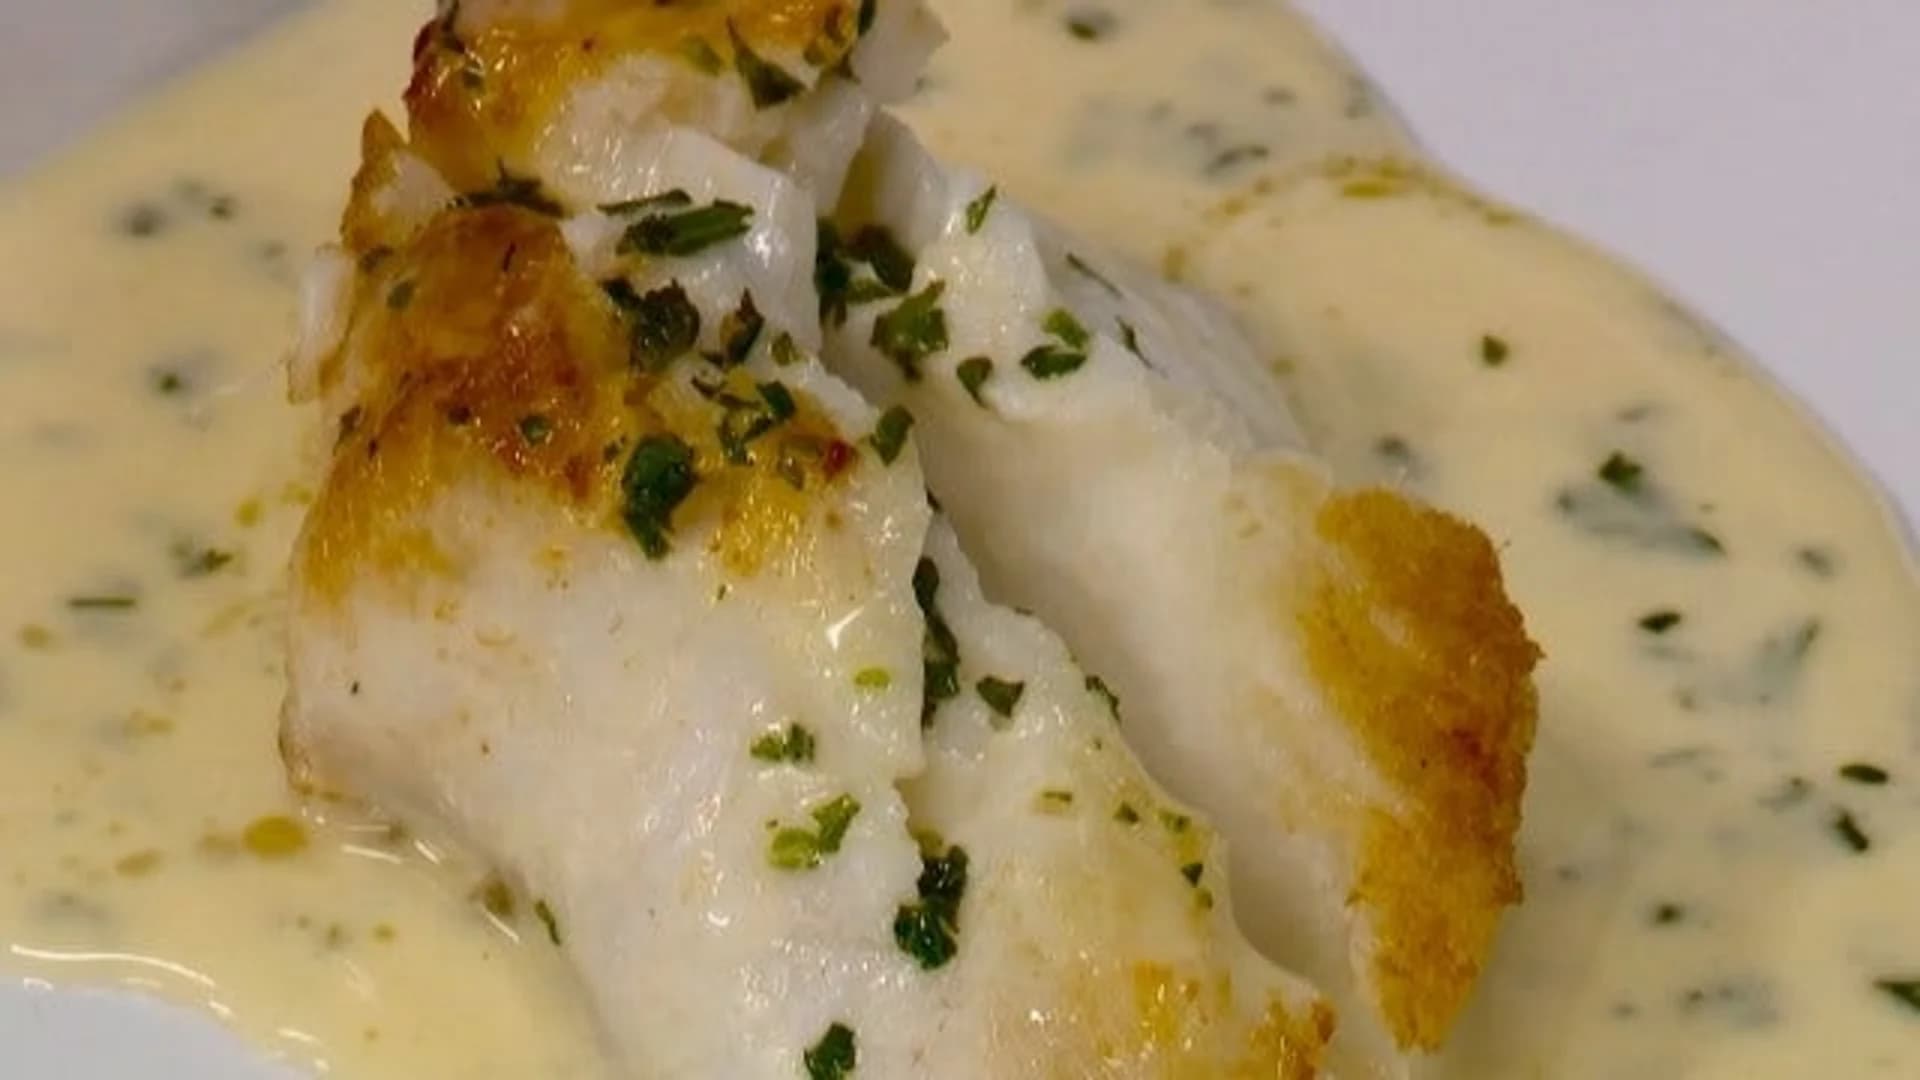 What's Cooking: Pan-roasted cod and beurre blanc